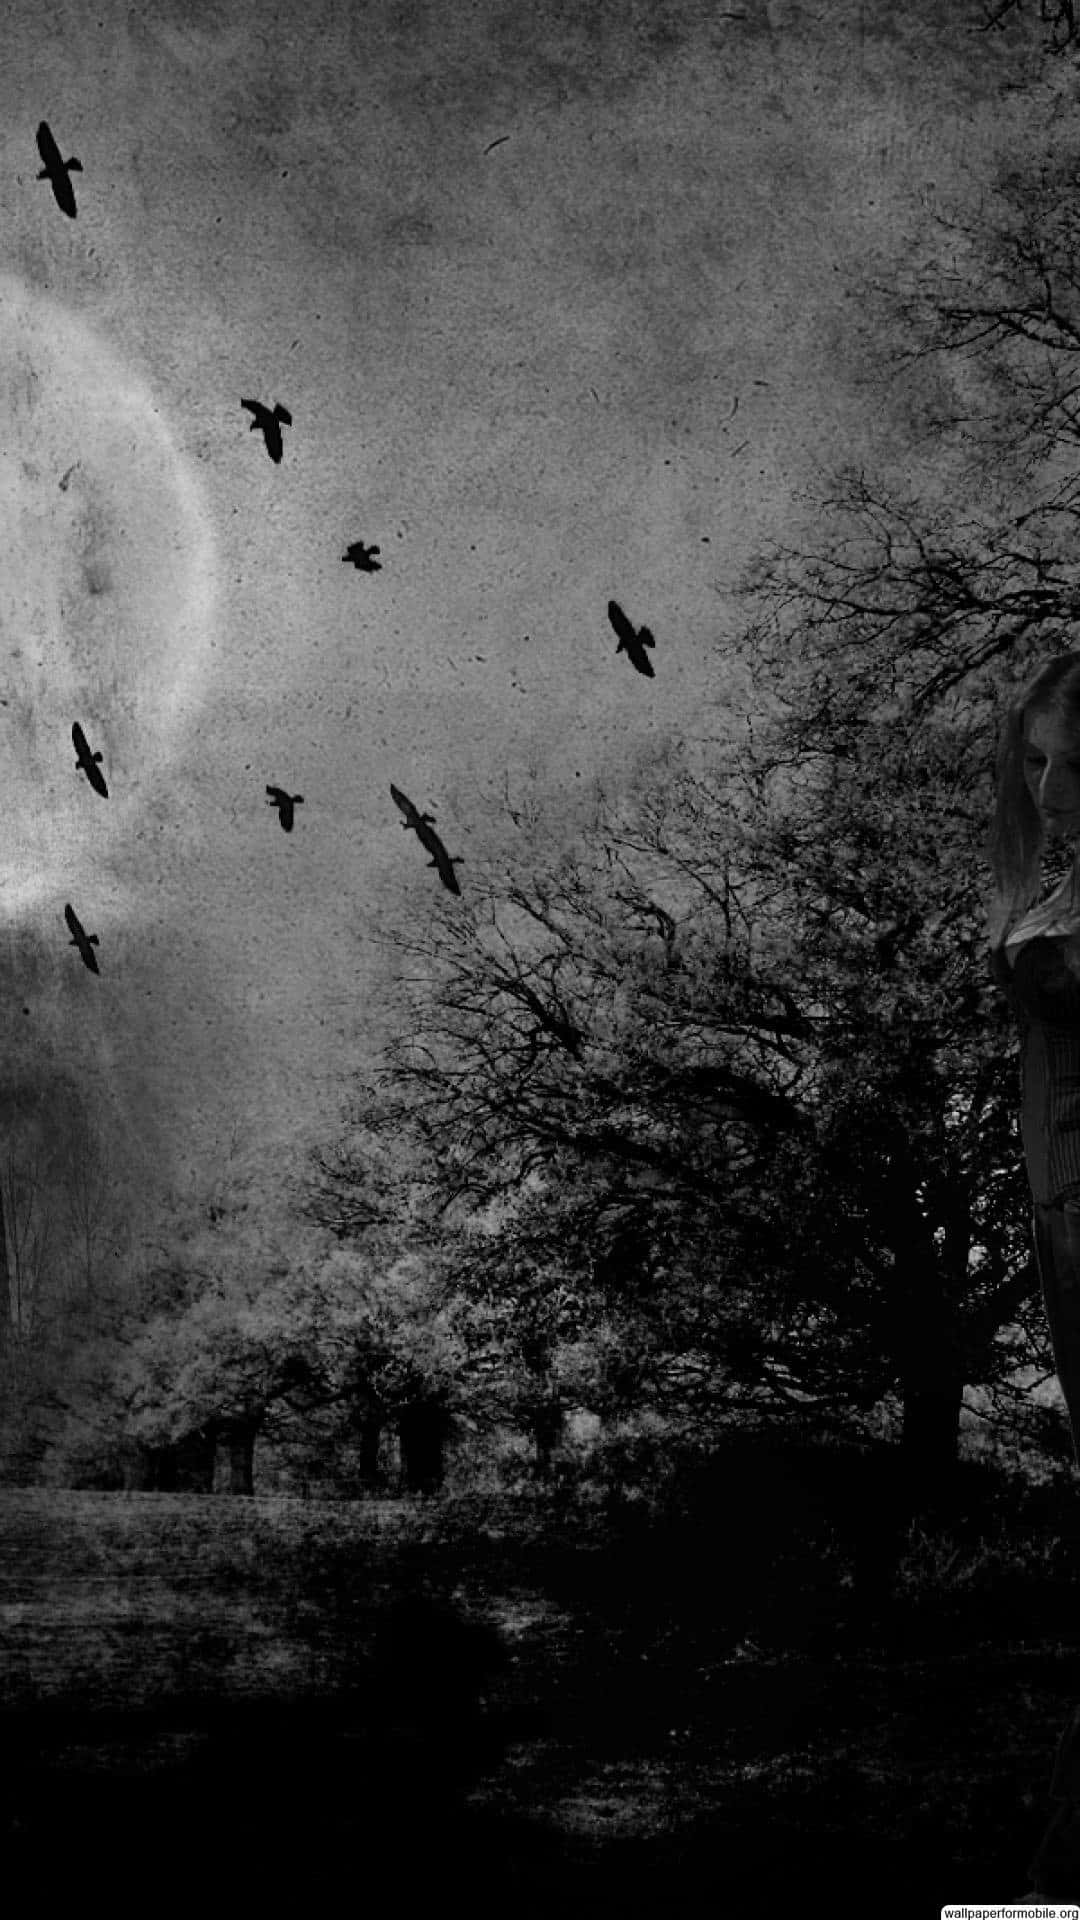 A Black And White Image Of A Woman With Birds In The Sky Wallpaper